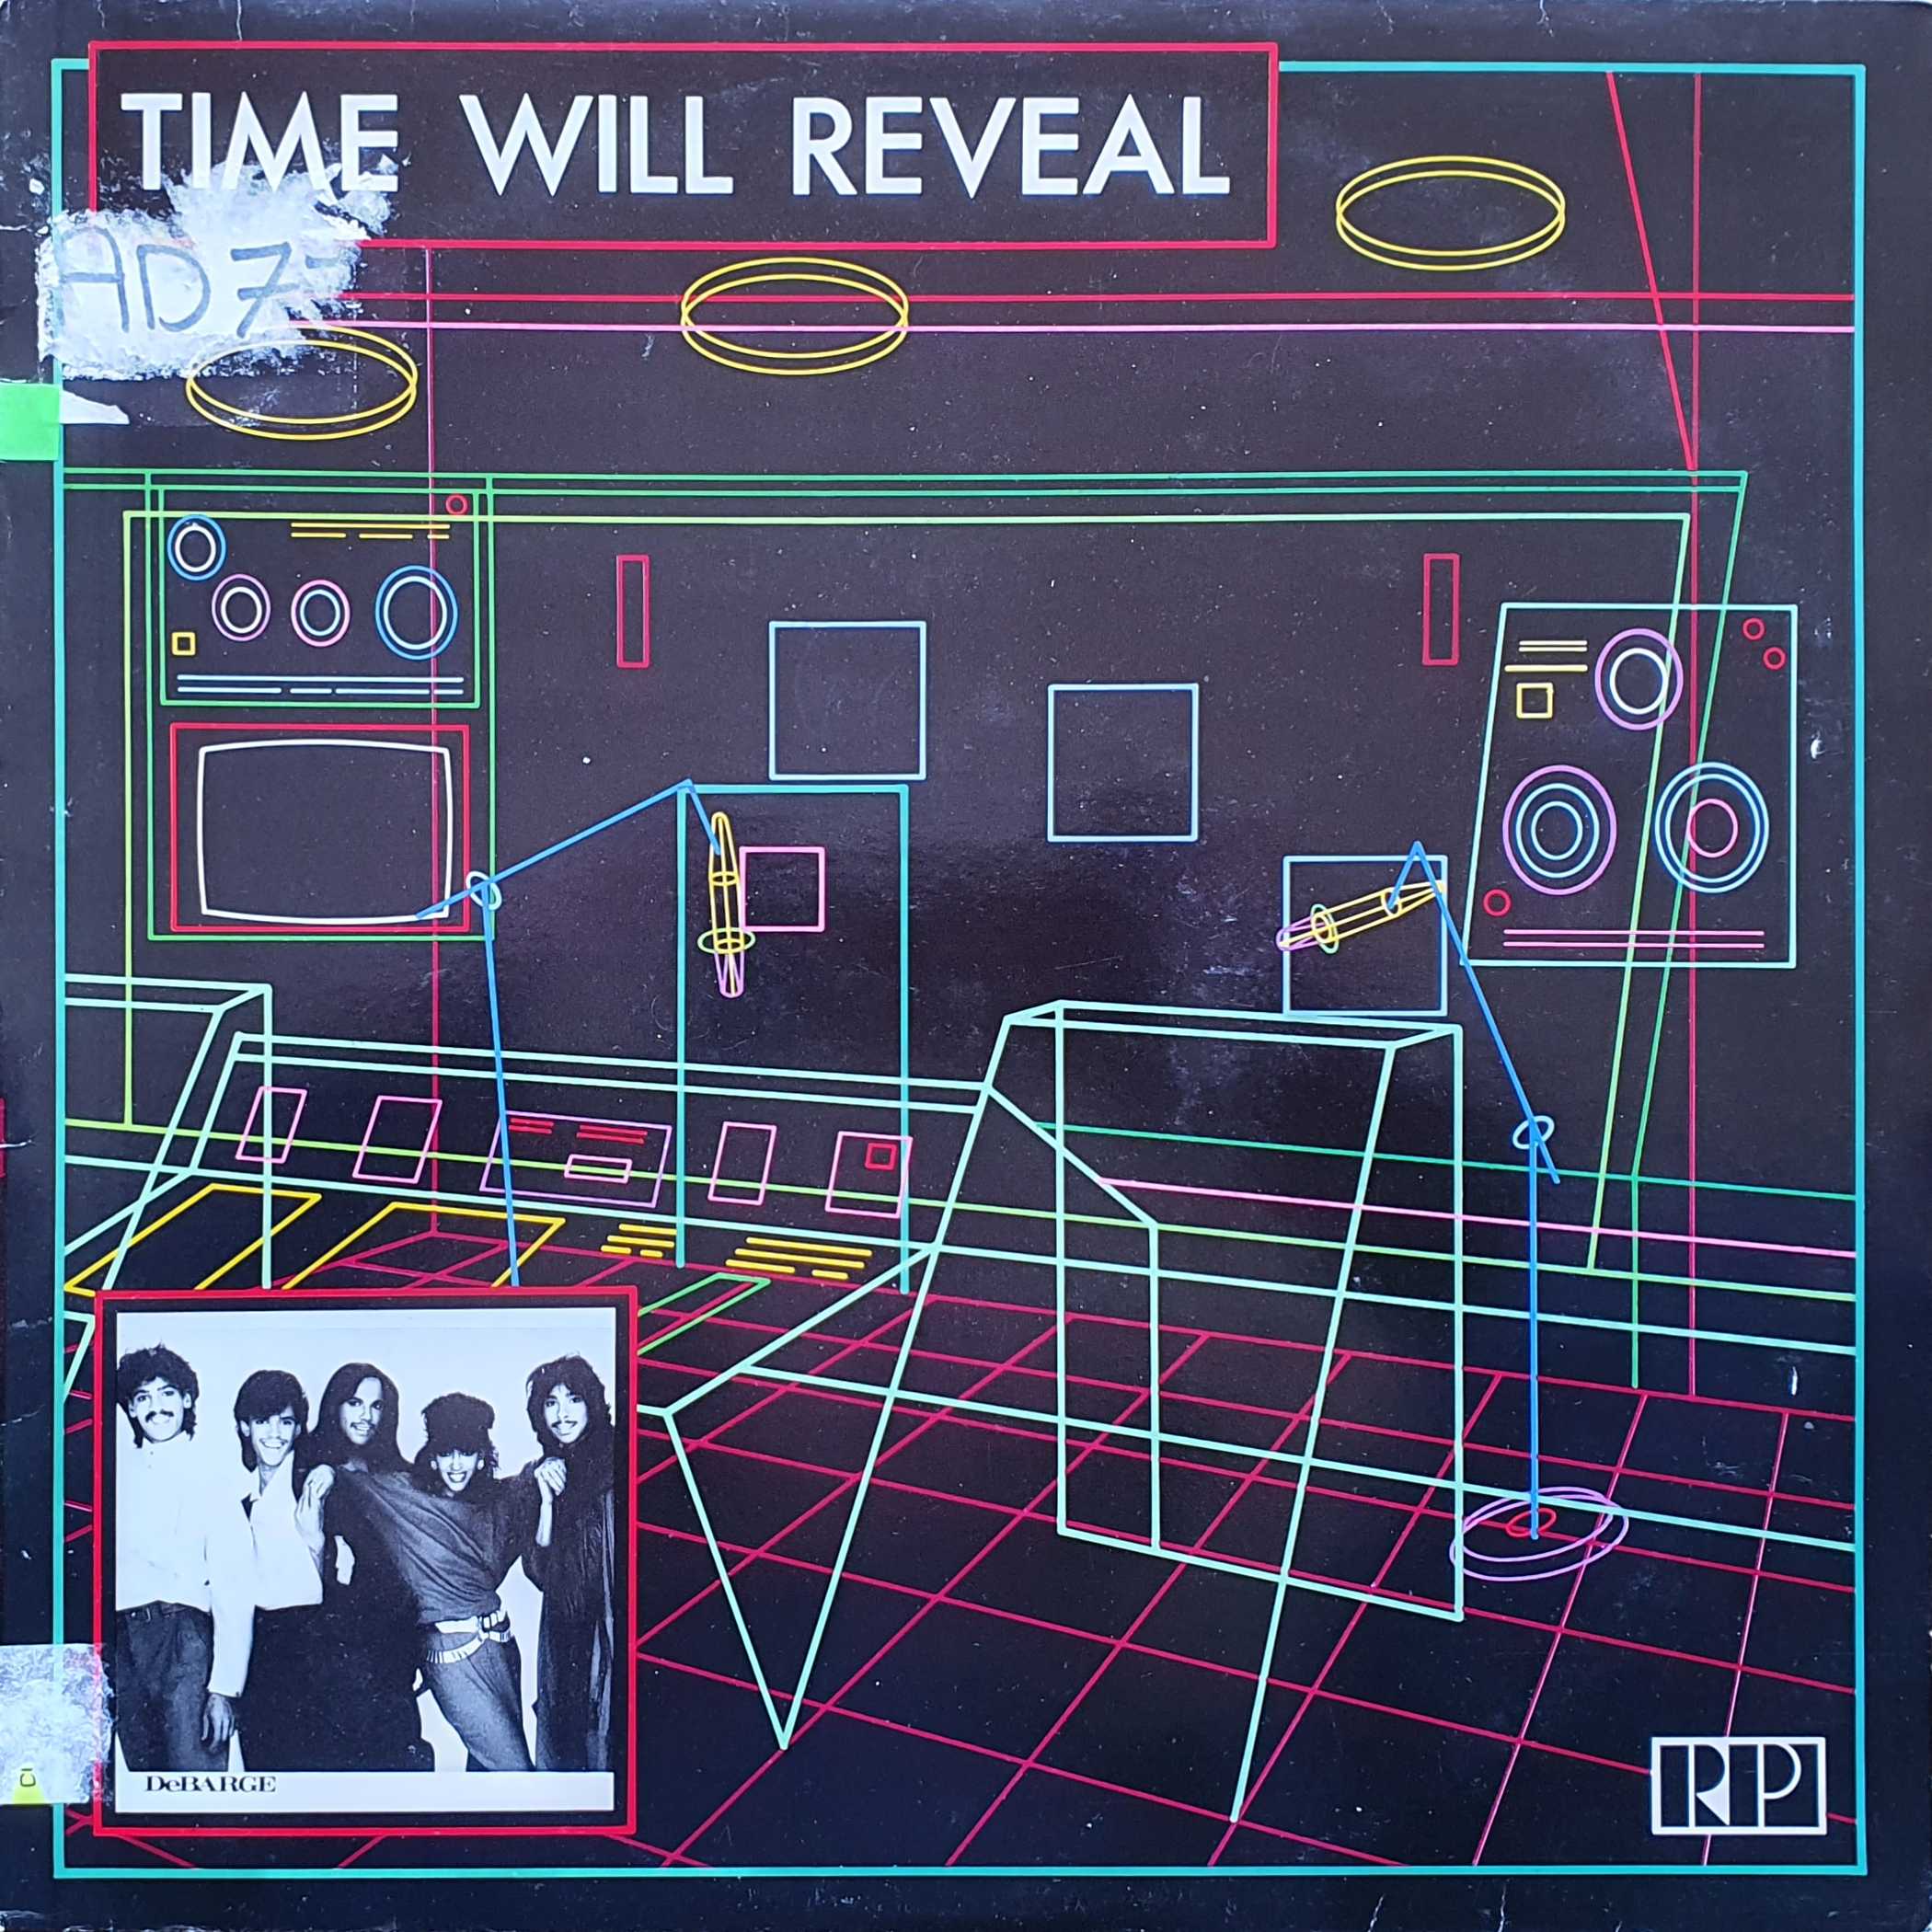 Picture of TAIR 86035 Time will reveal by artist DeBarge from the BBC albums - Records and Tapes library